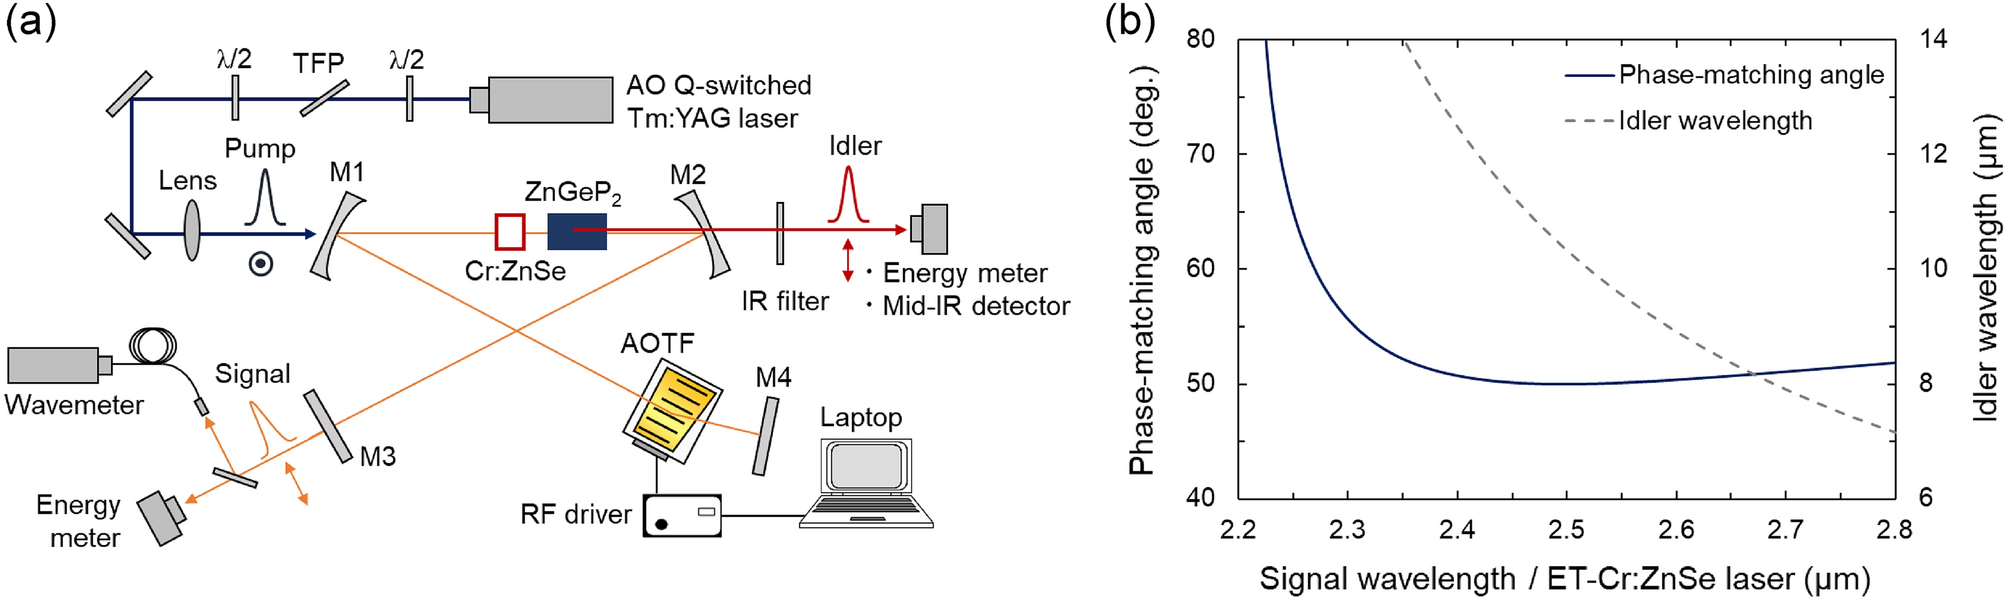 Mid-infrared electronic wavelength tuning through intracavity  difference-frequency mixing in Cr:ZnSe lasers | Scientific Reports